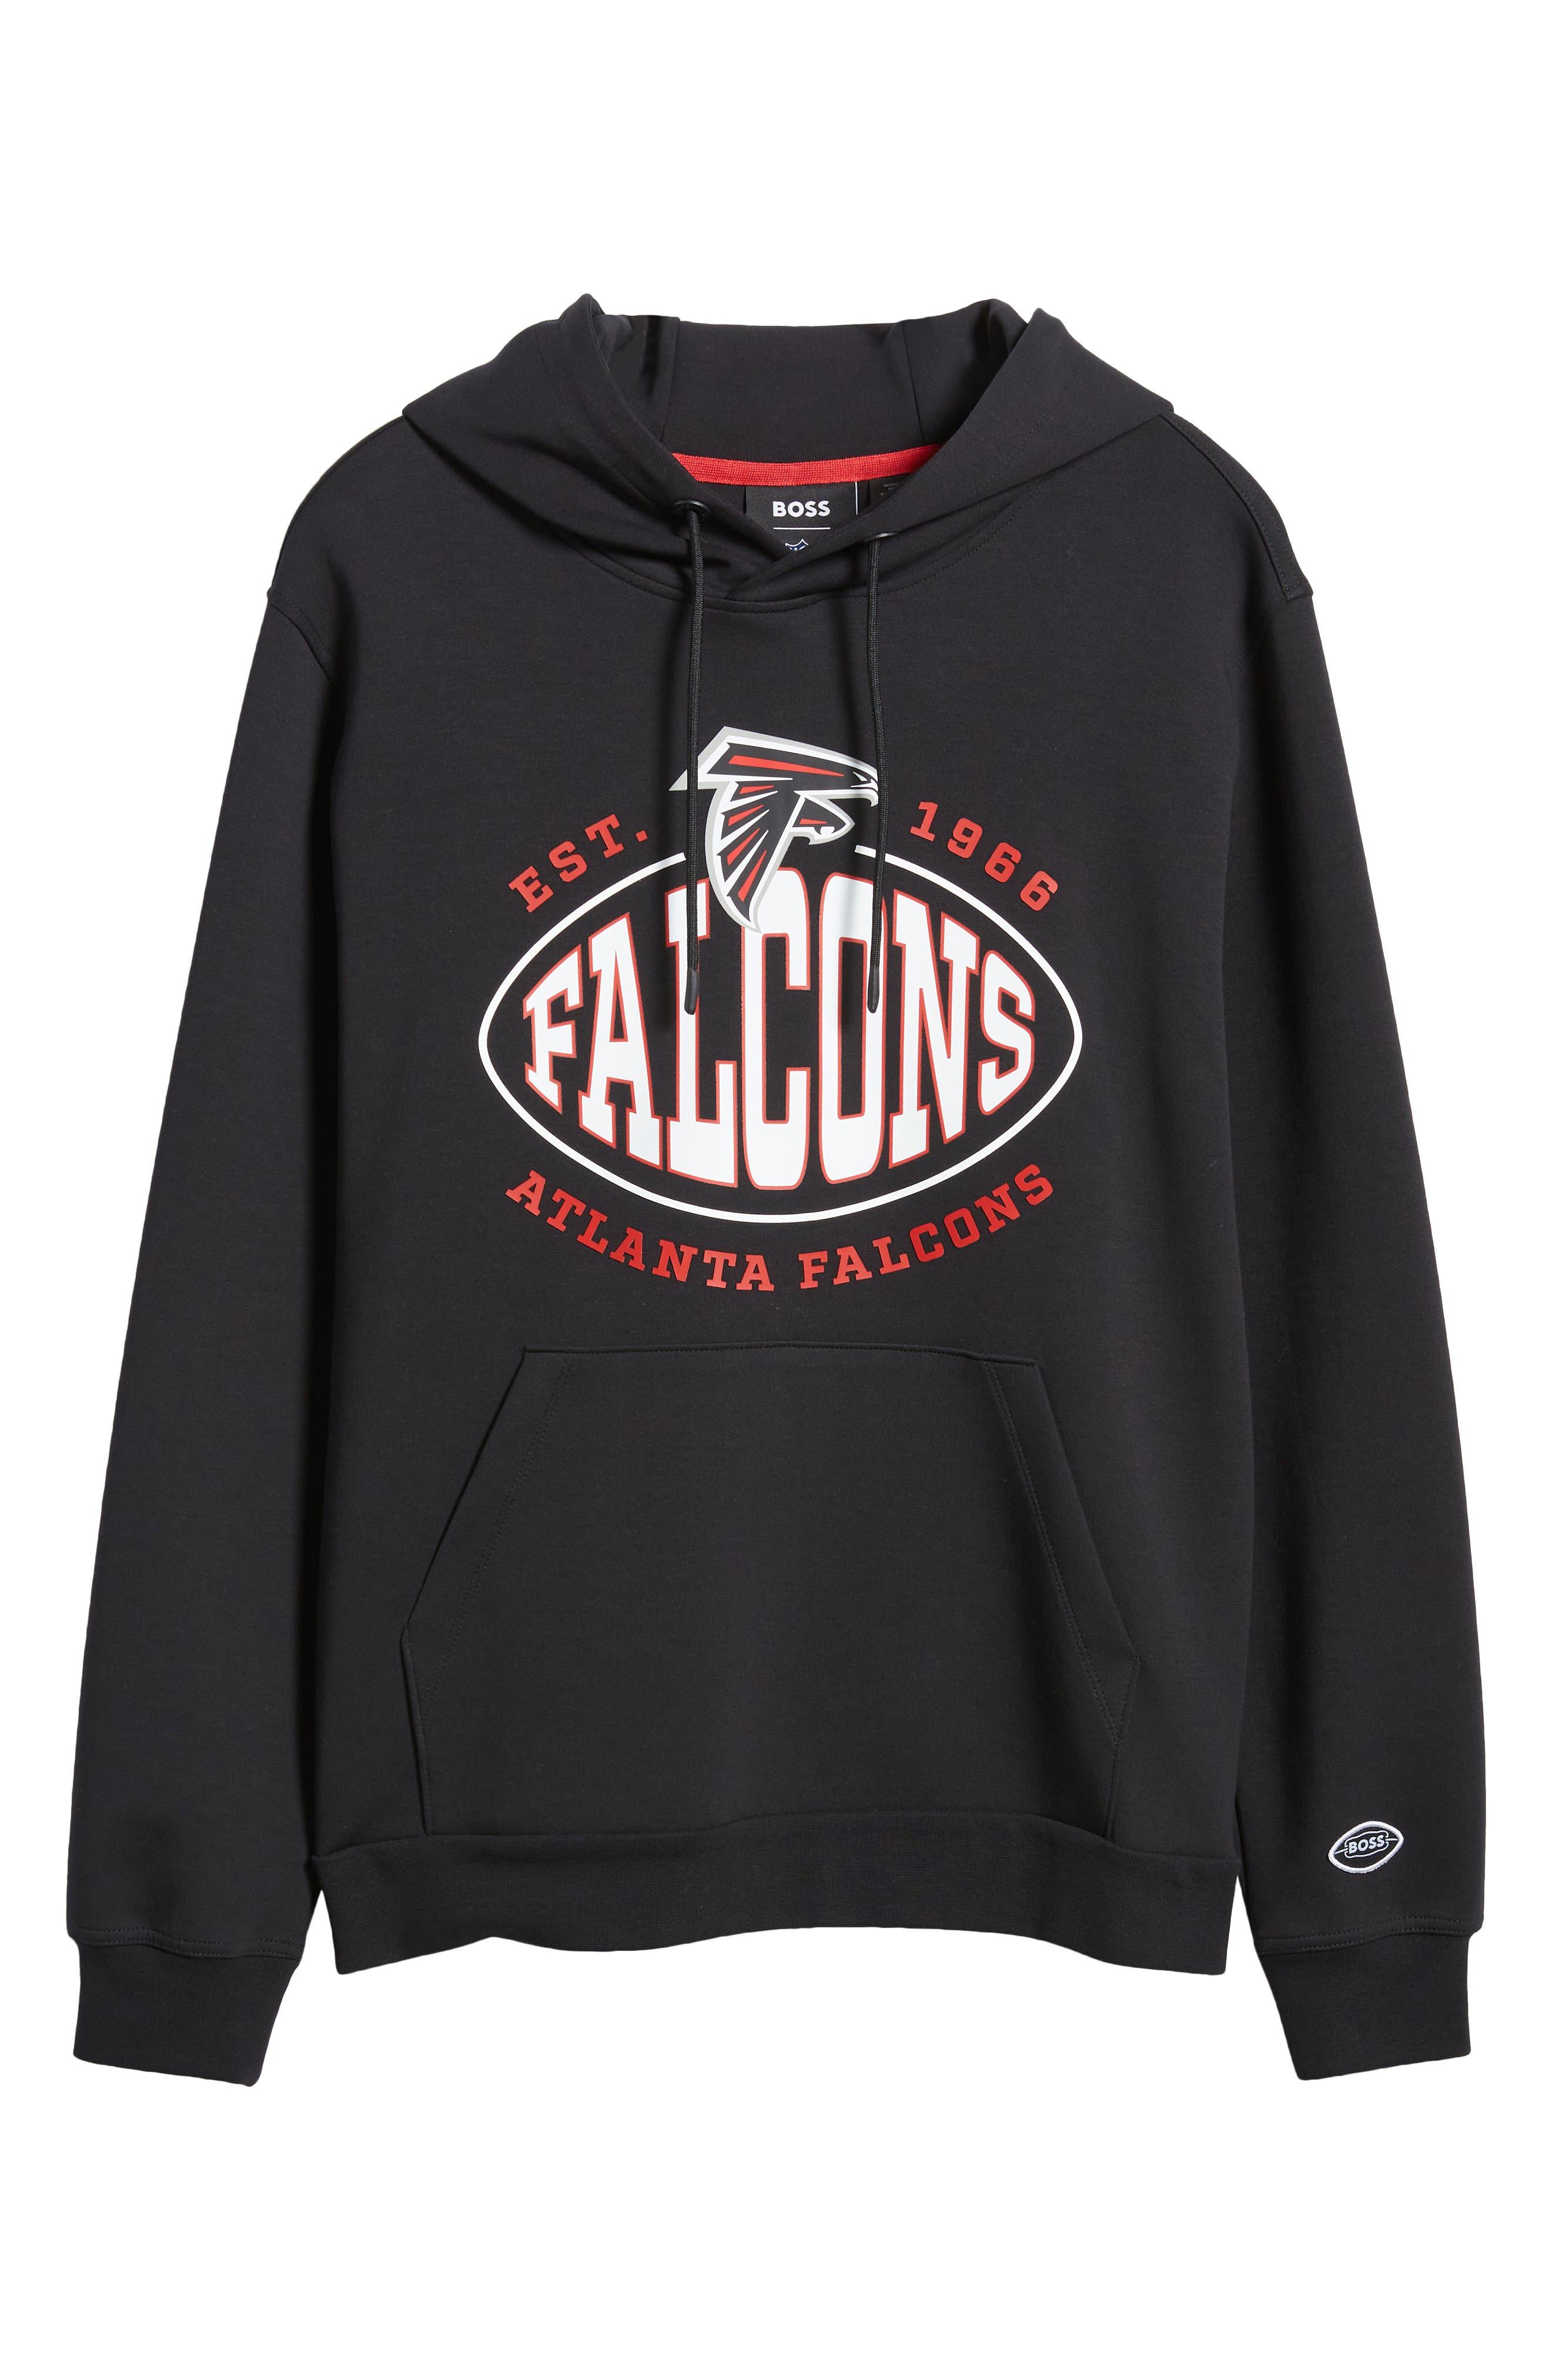 BOSS by HUGO BOSS X Nfl Touchback Atlanta Falcons Graphic Hoodie in Black  for Men | Lyst